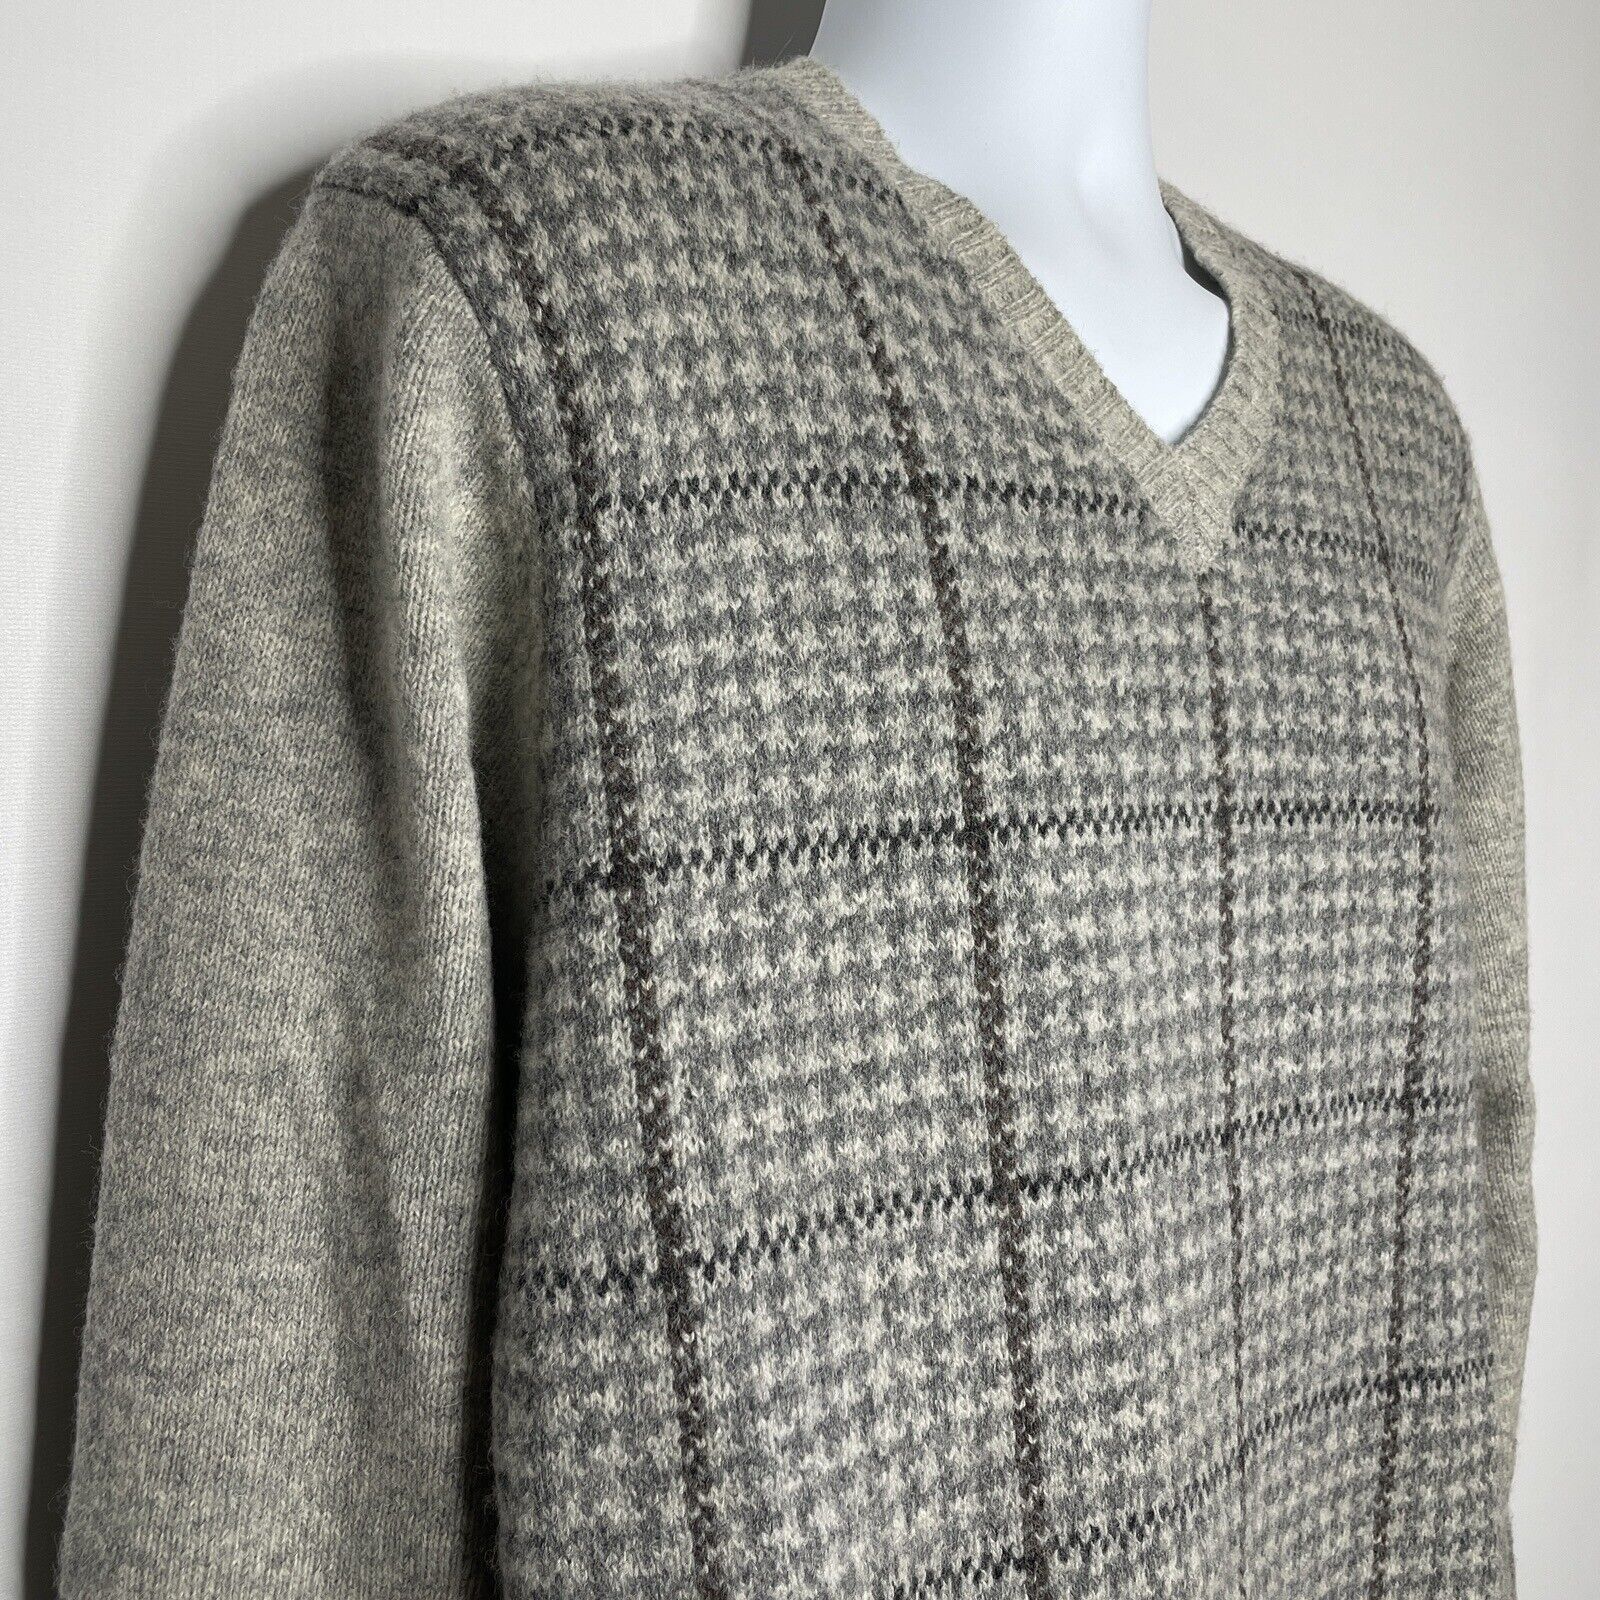 Vintage 80s Gray Shetland Wool Houndstooth Plaid Pullover Sweater Size US L / EU 52-54 / 3 - 4 Thumbnail